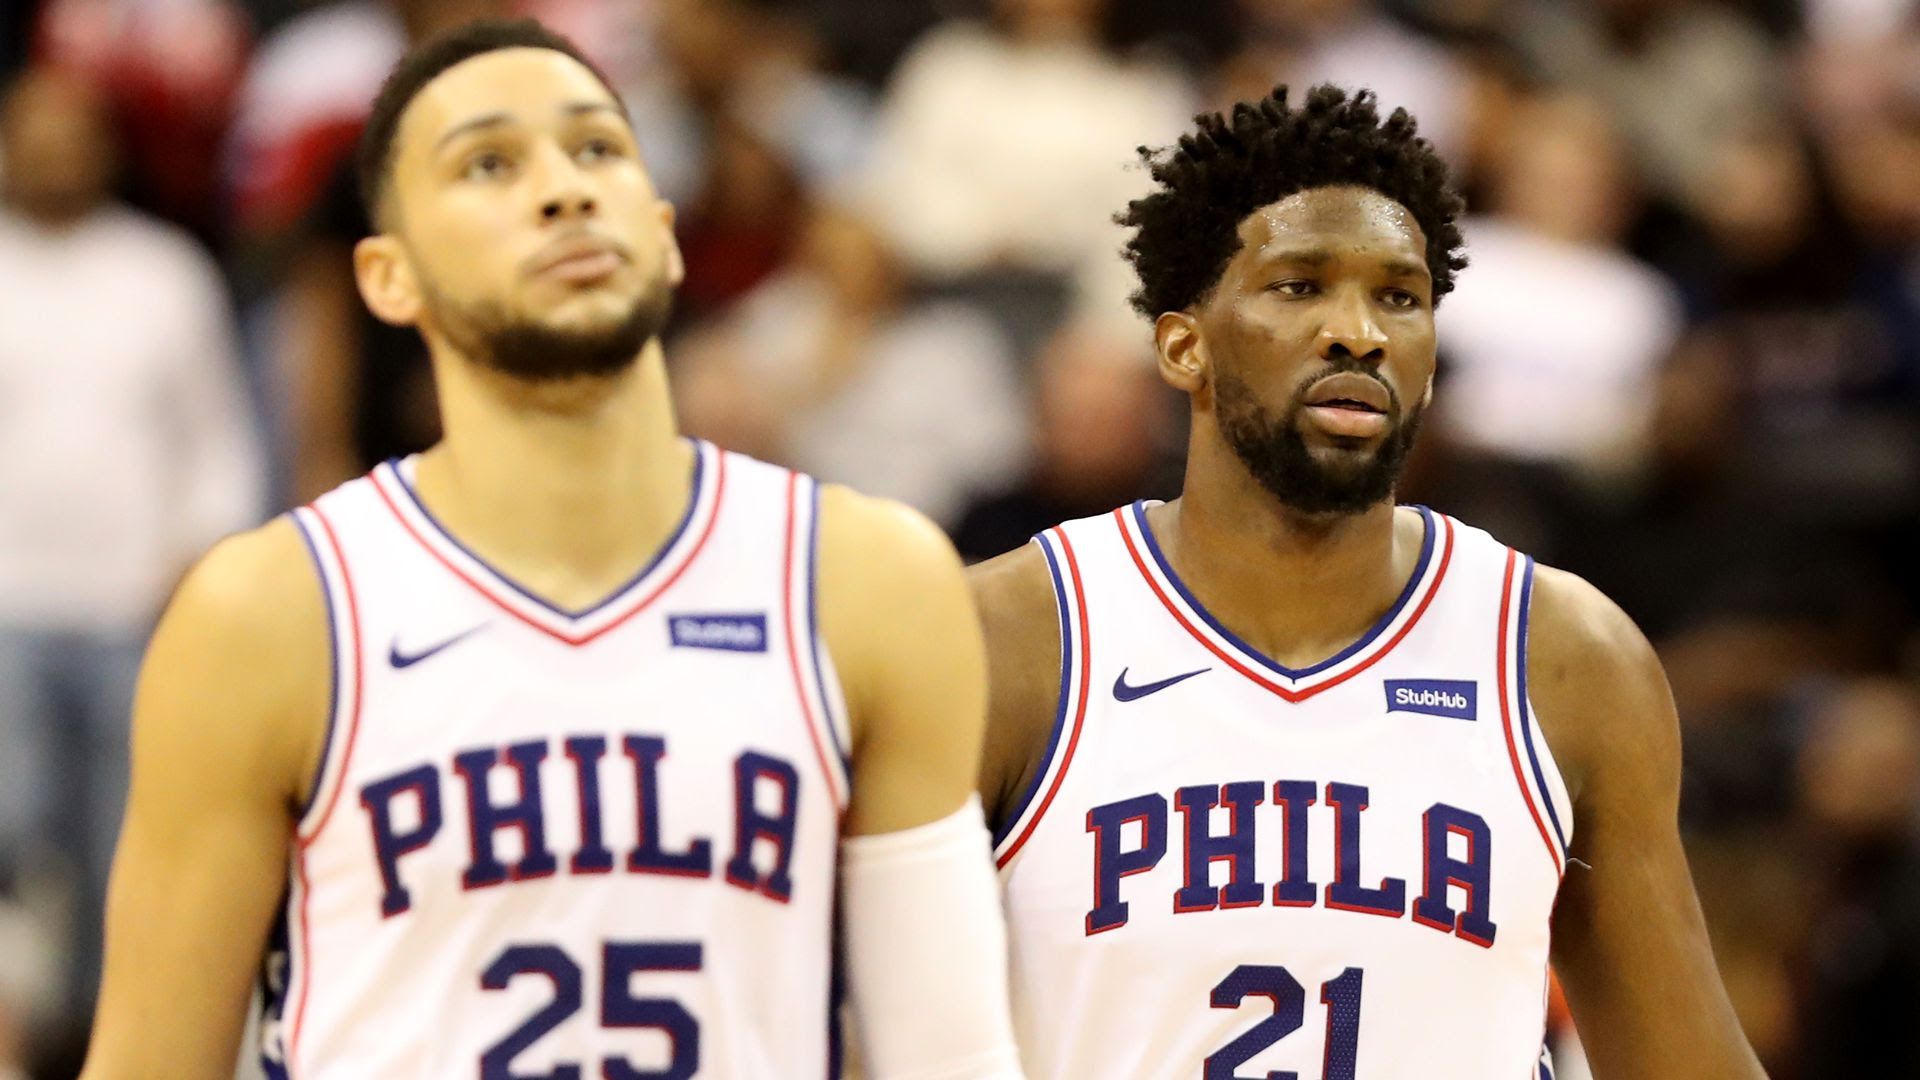 Sixers vs. Celtics in the NBA playoffs: What to know - Axios Philadelphia